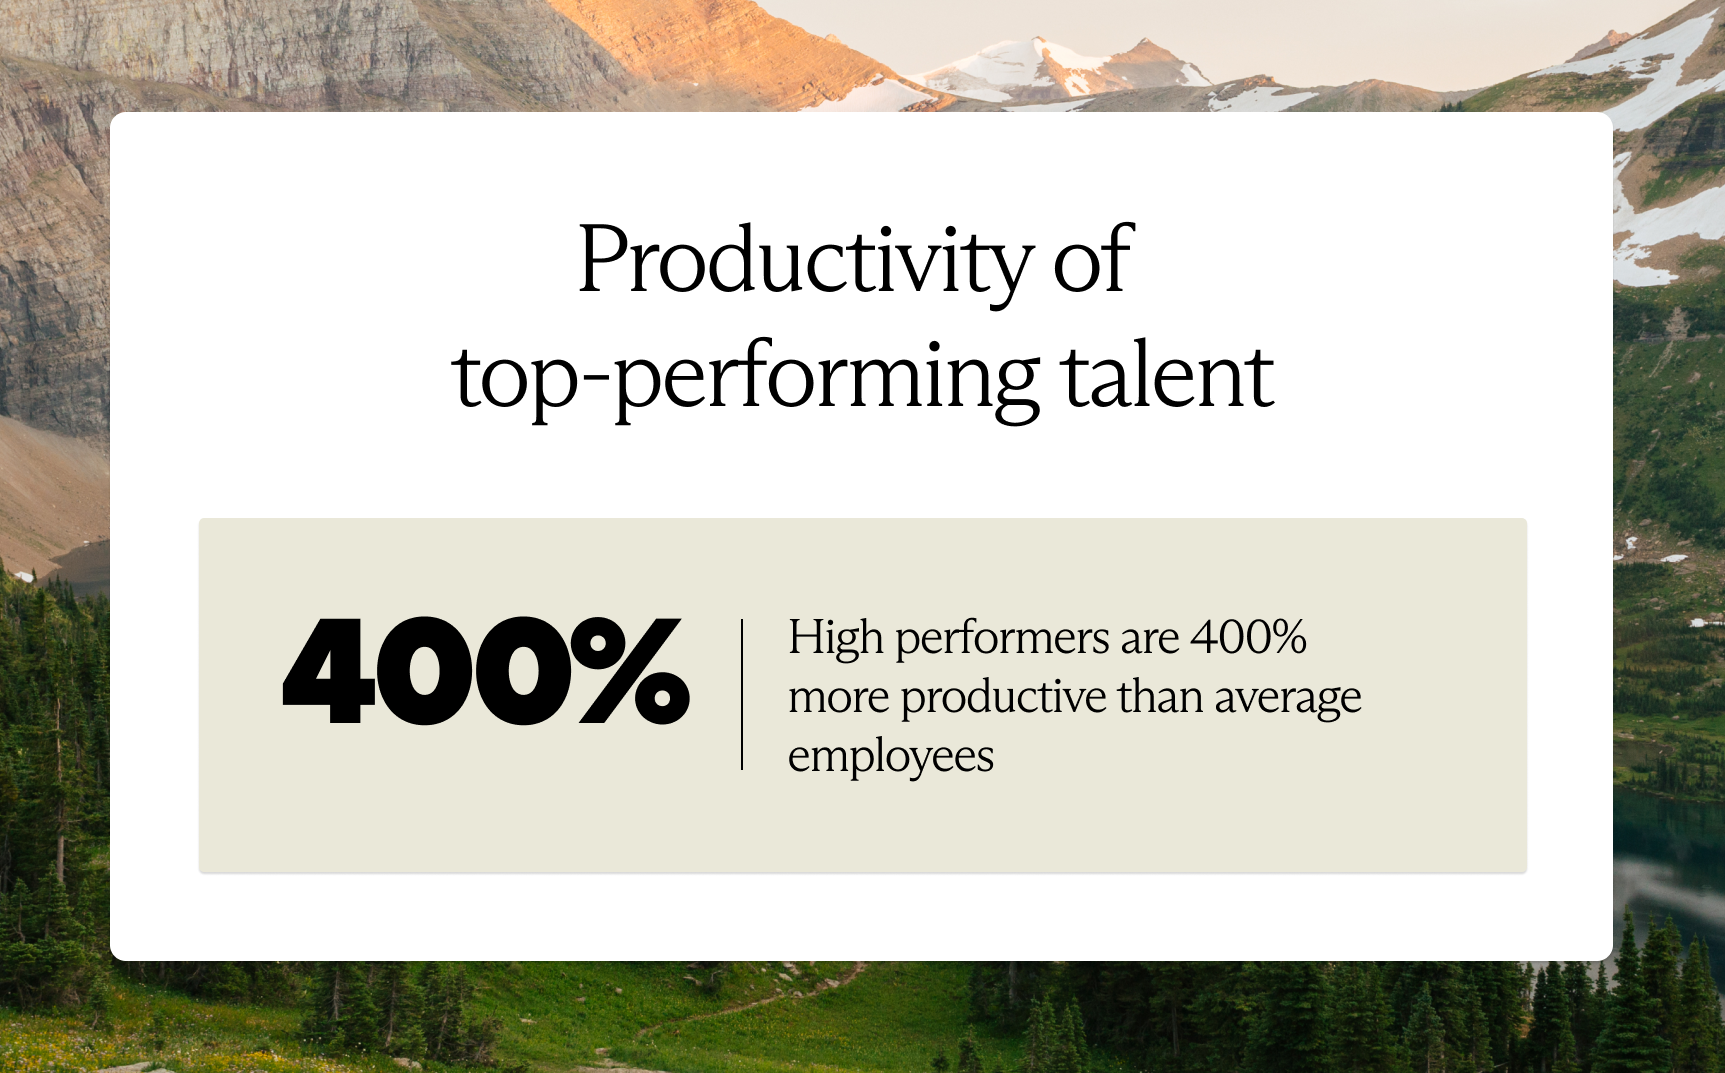 Productivity of top-performing talent